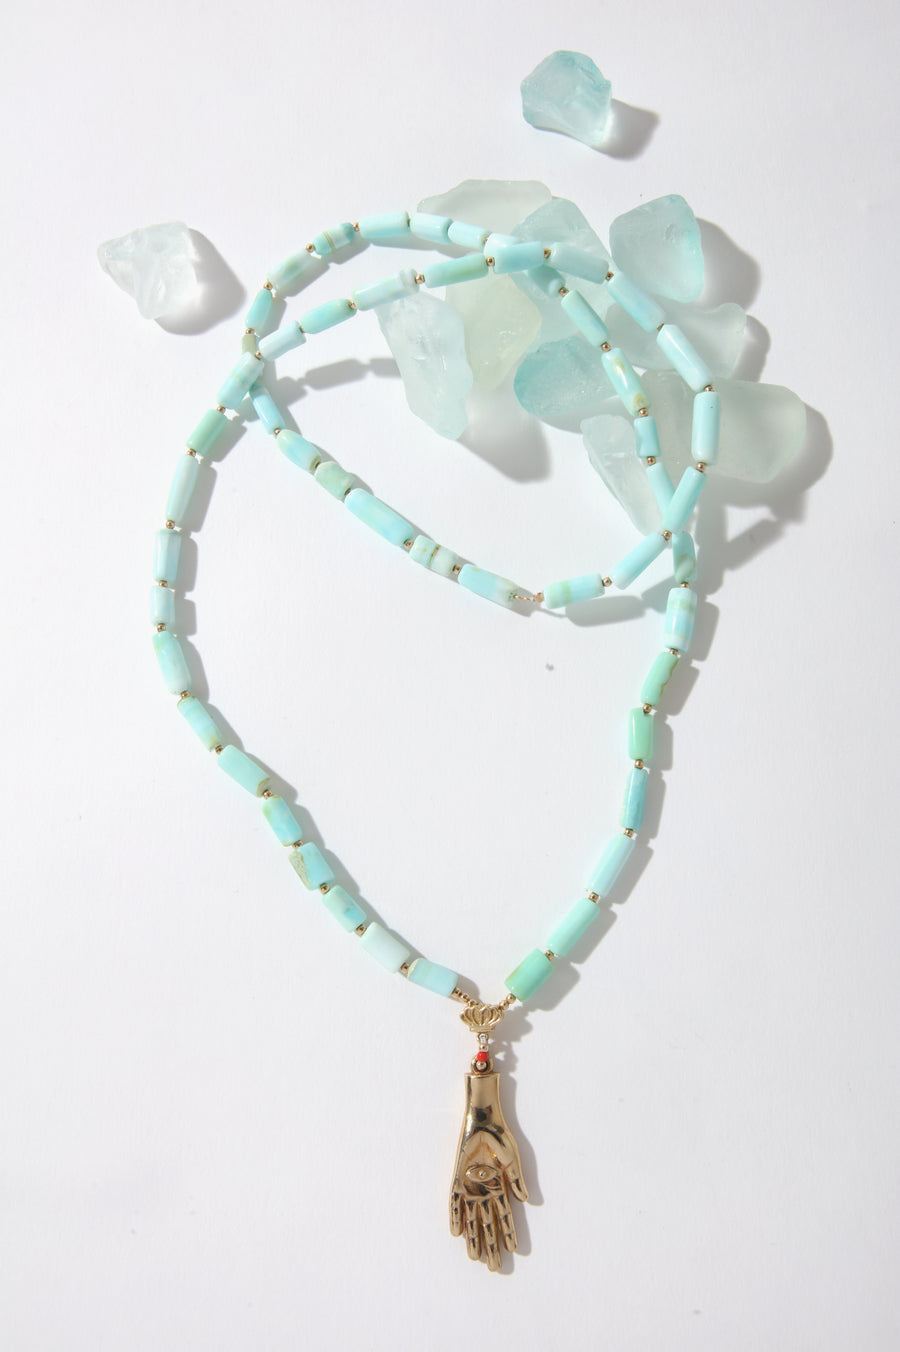 Queen & Tulip Giving Hand on Opals Necklace